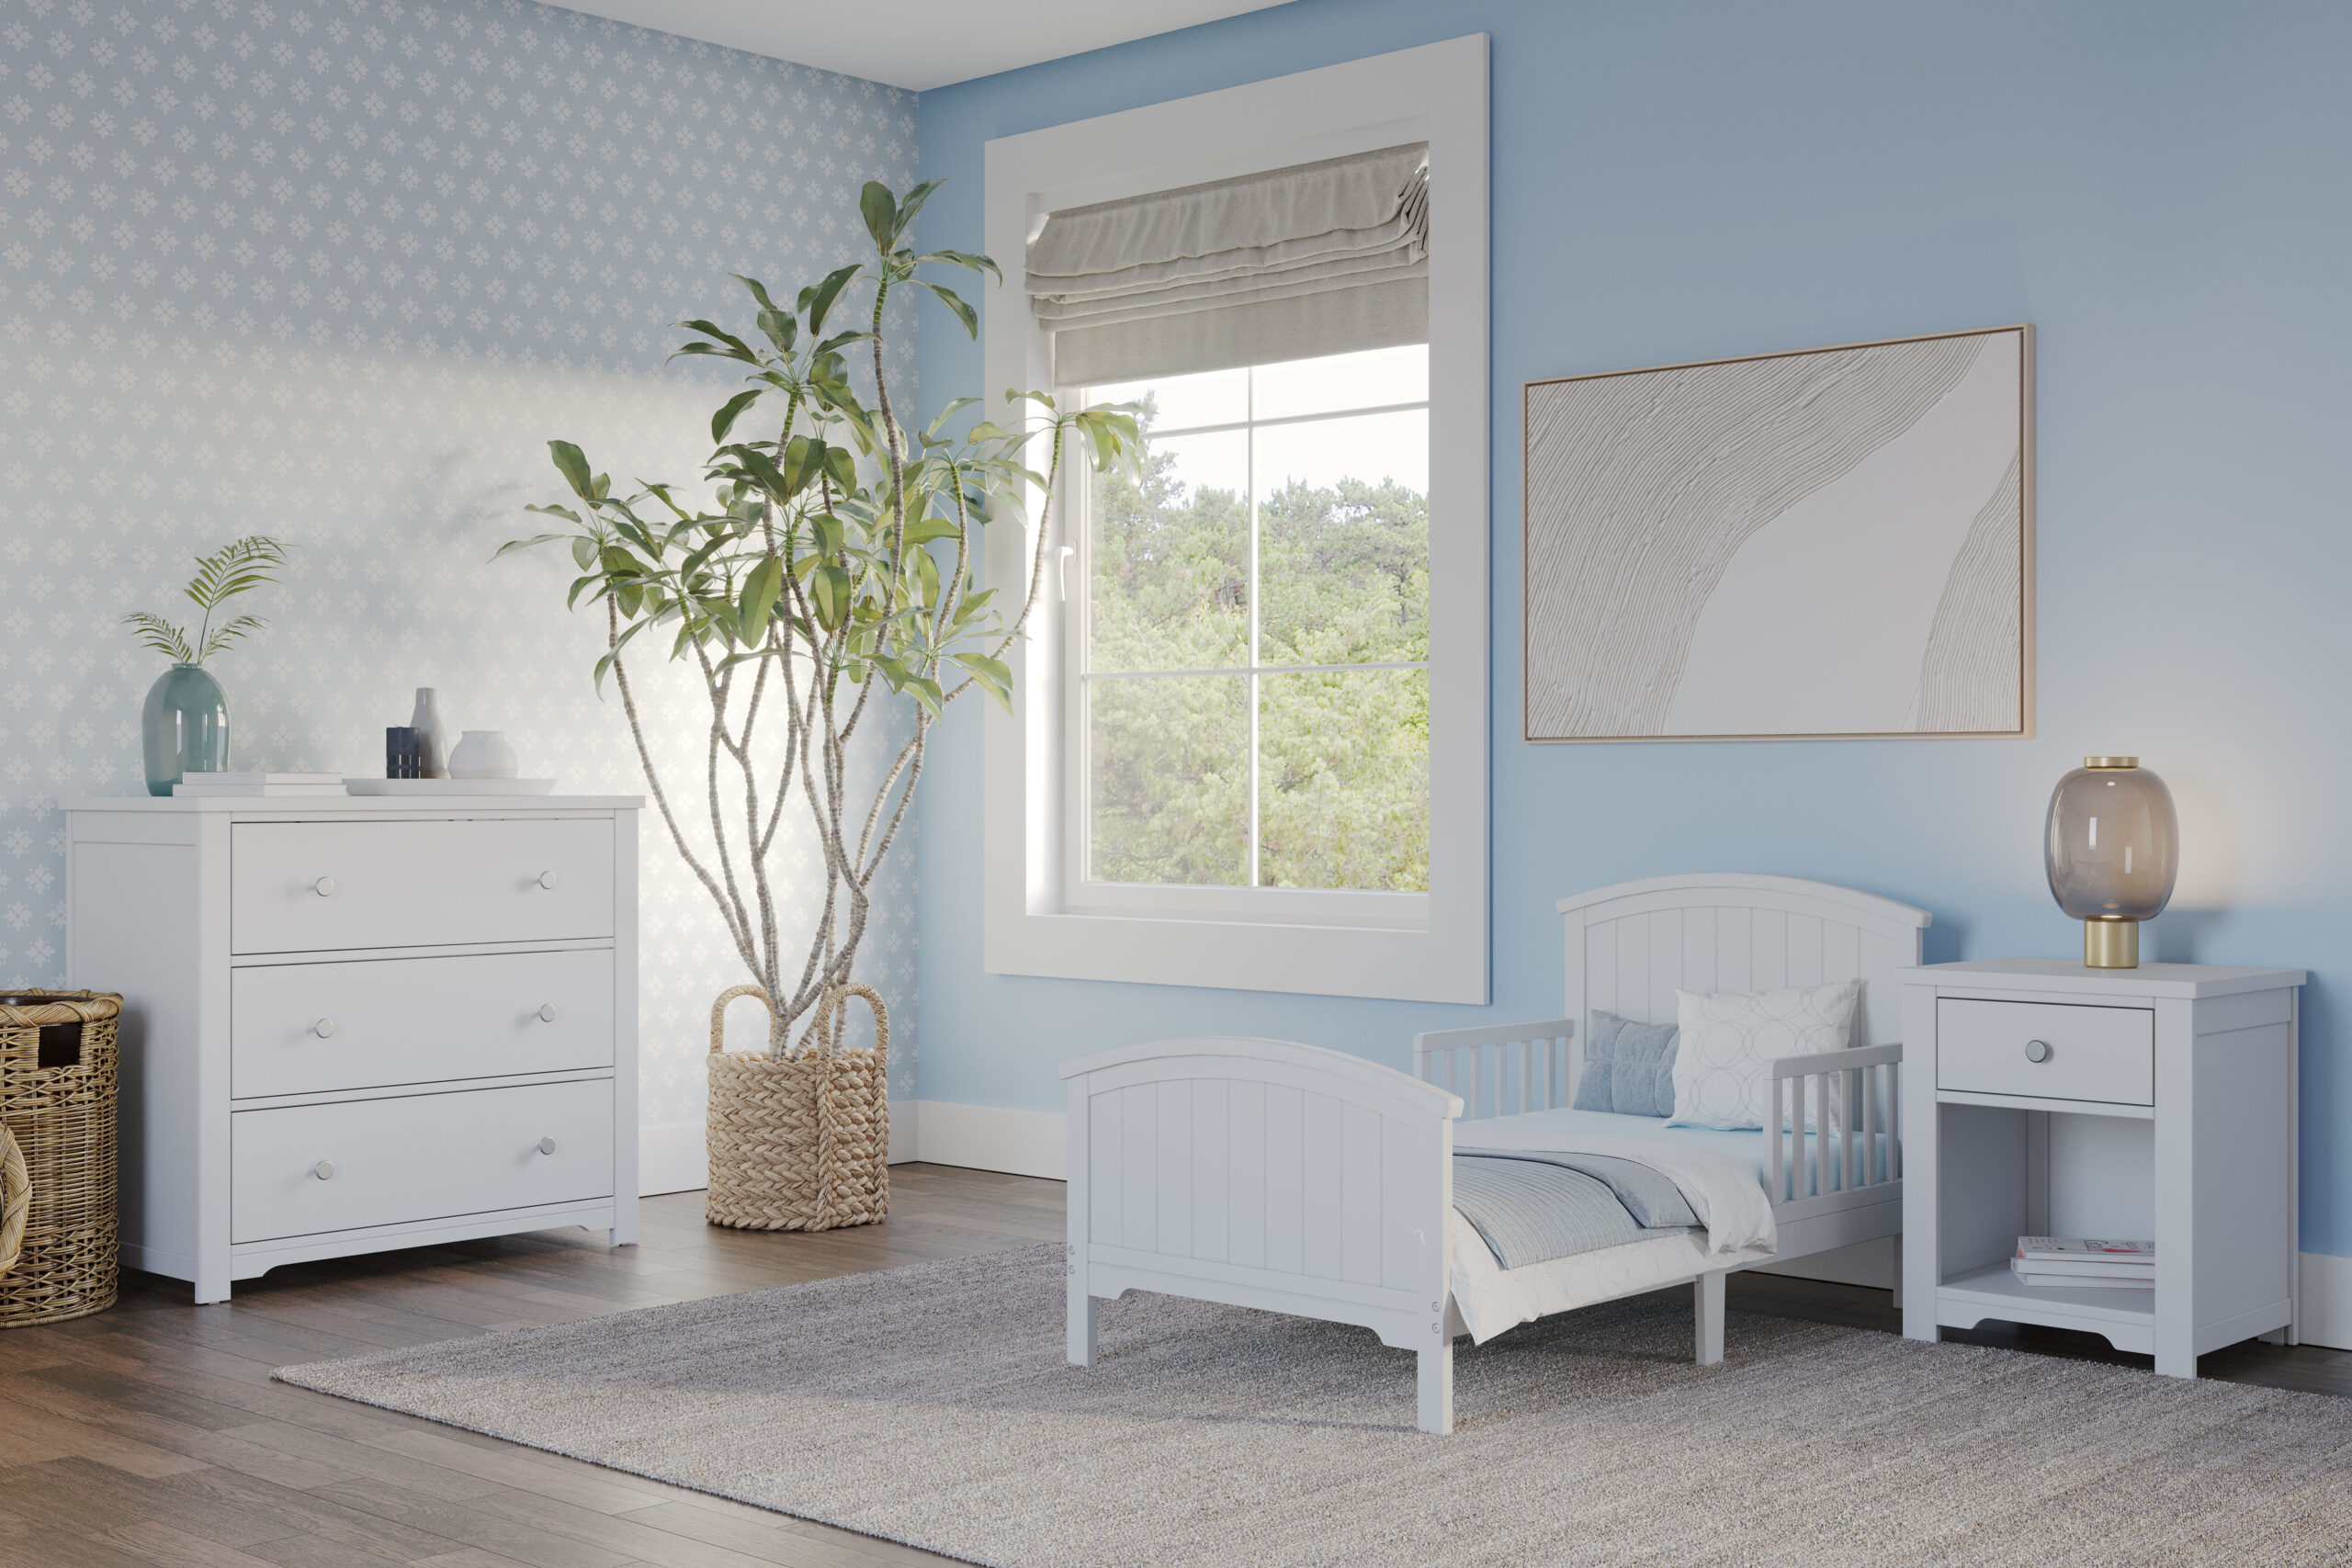 5 Steps to Creating a Toddler Room